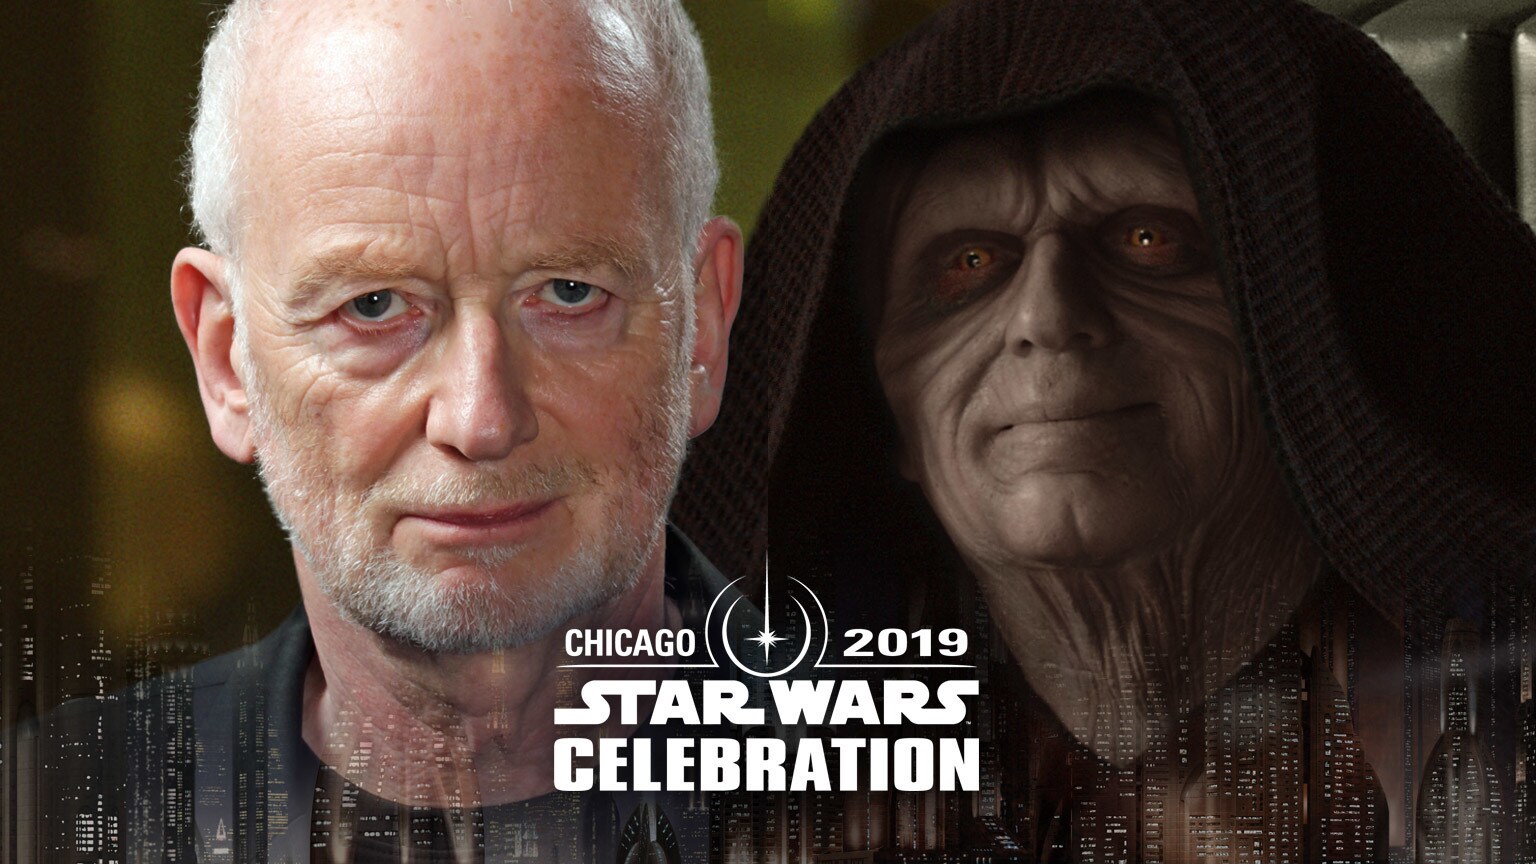 Emperor Palpatine Actor Among Guests at Star Wars Celebration Chicago